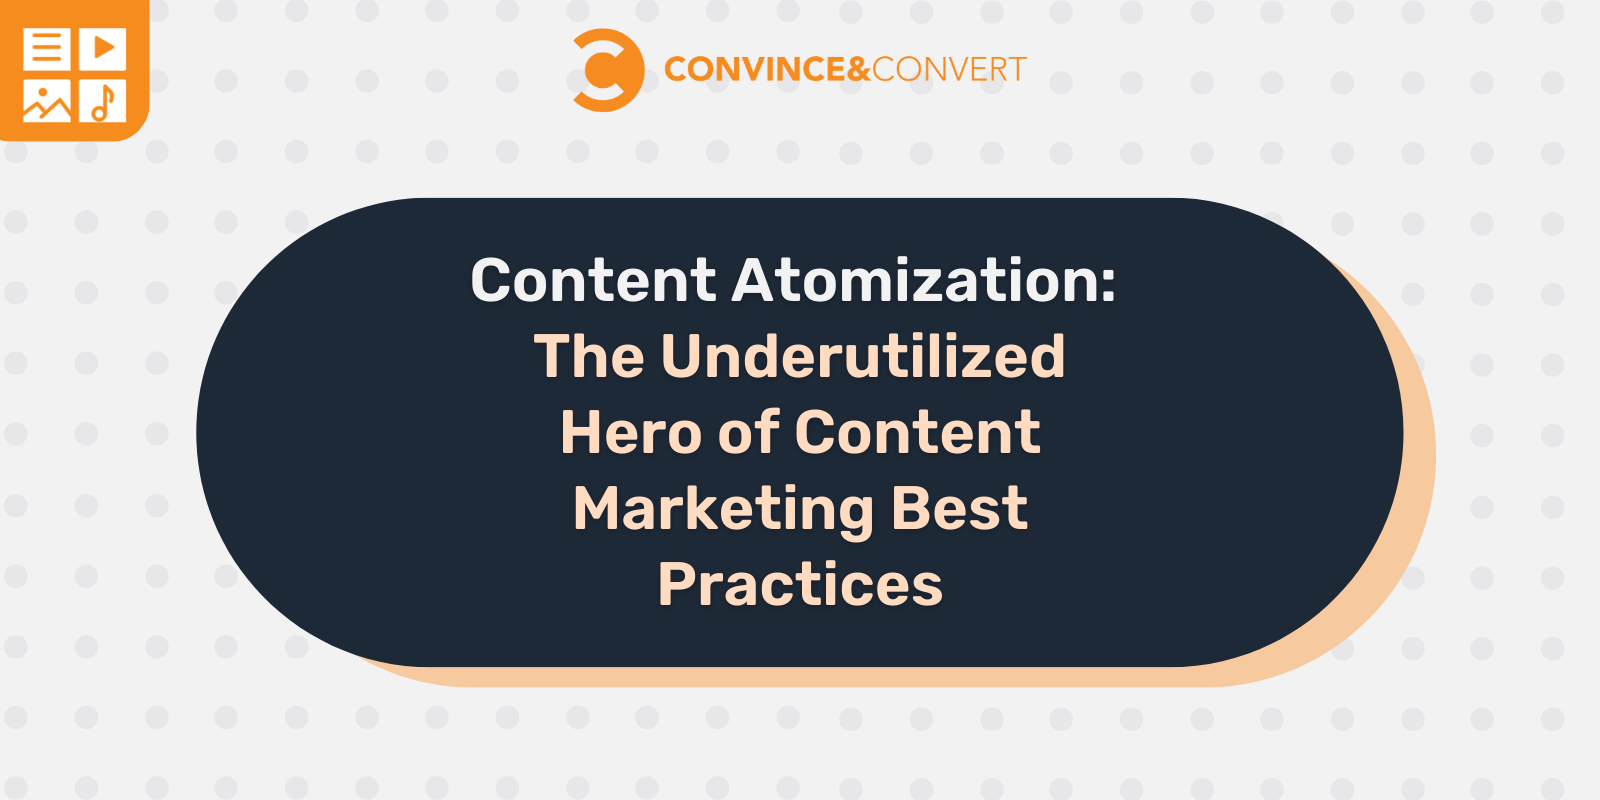 Content Atomization The Underutilized Hero of Content Marketing Best Practices